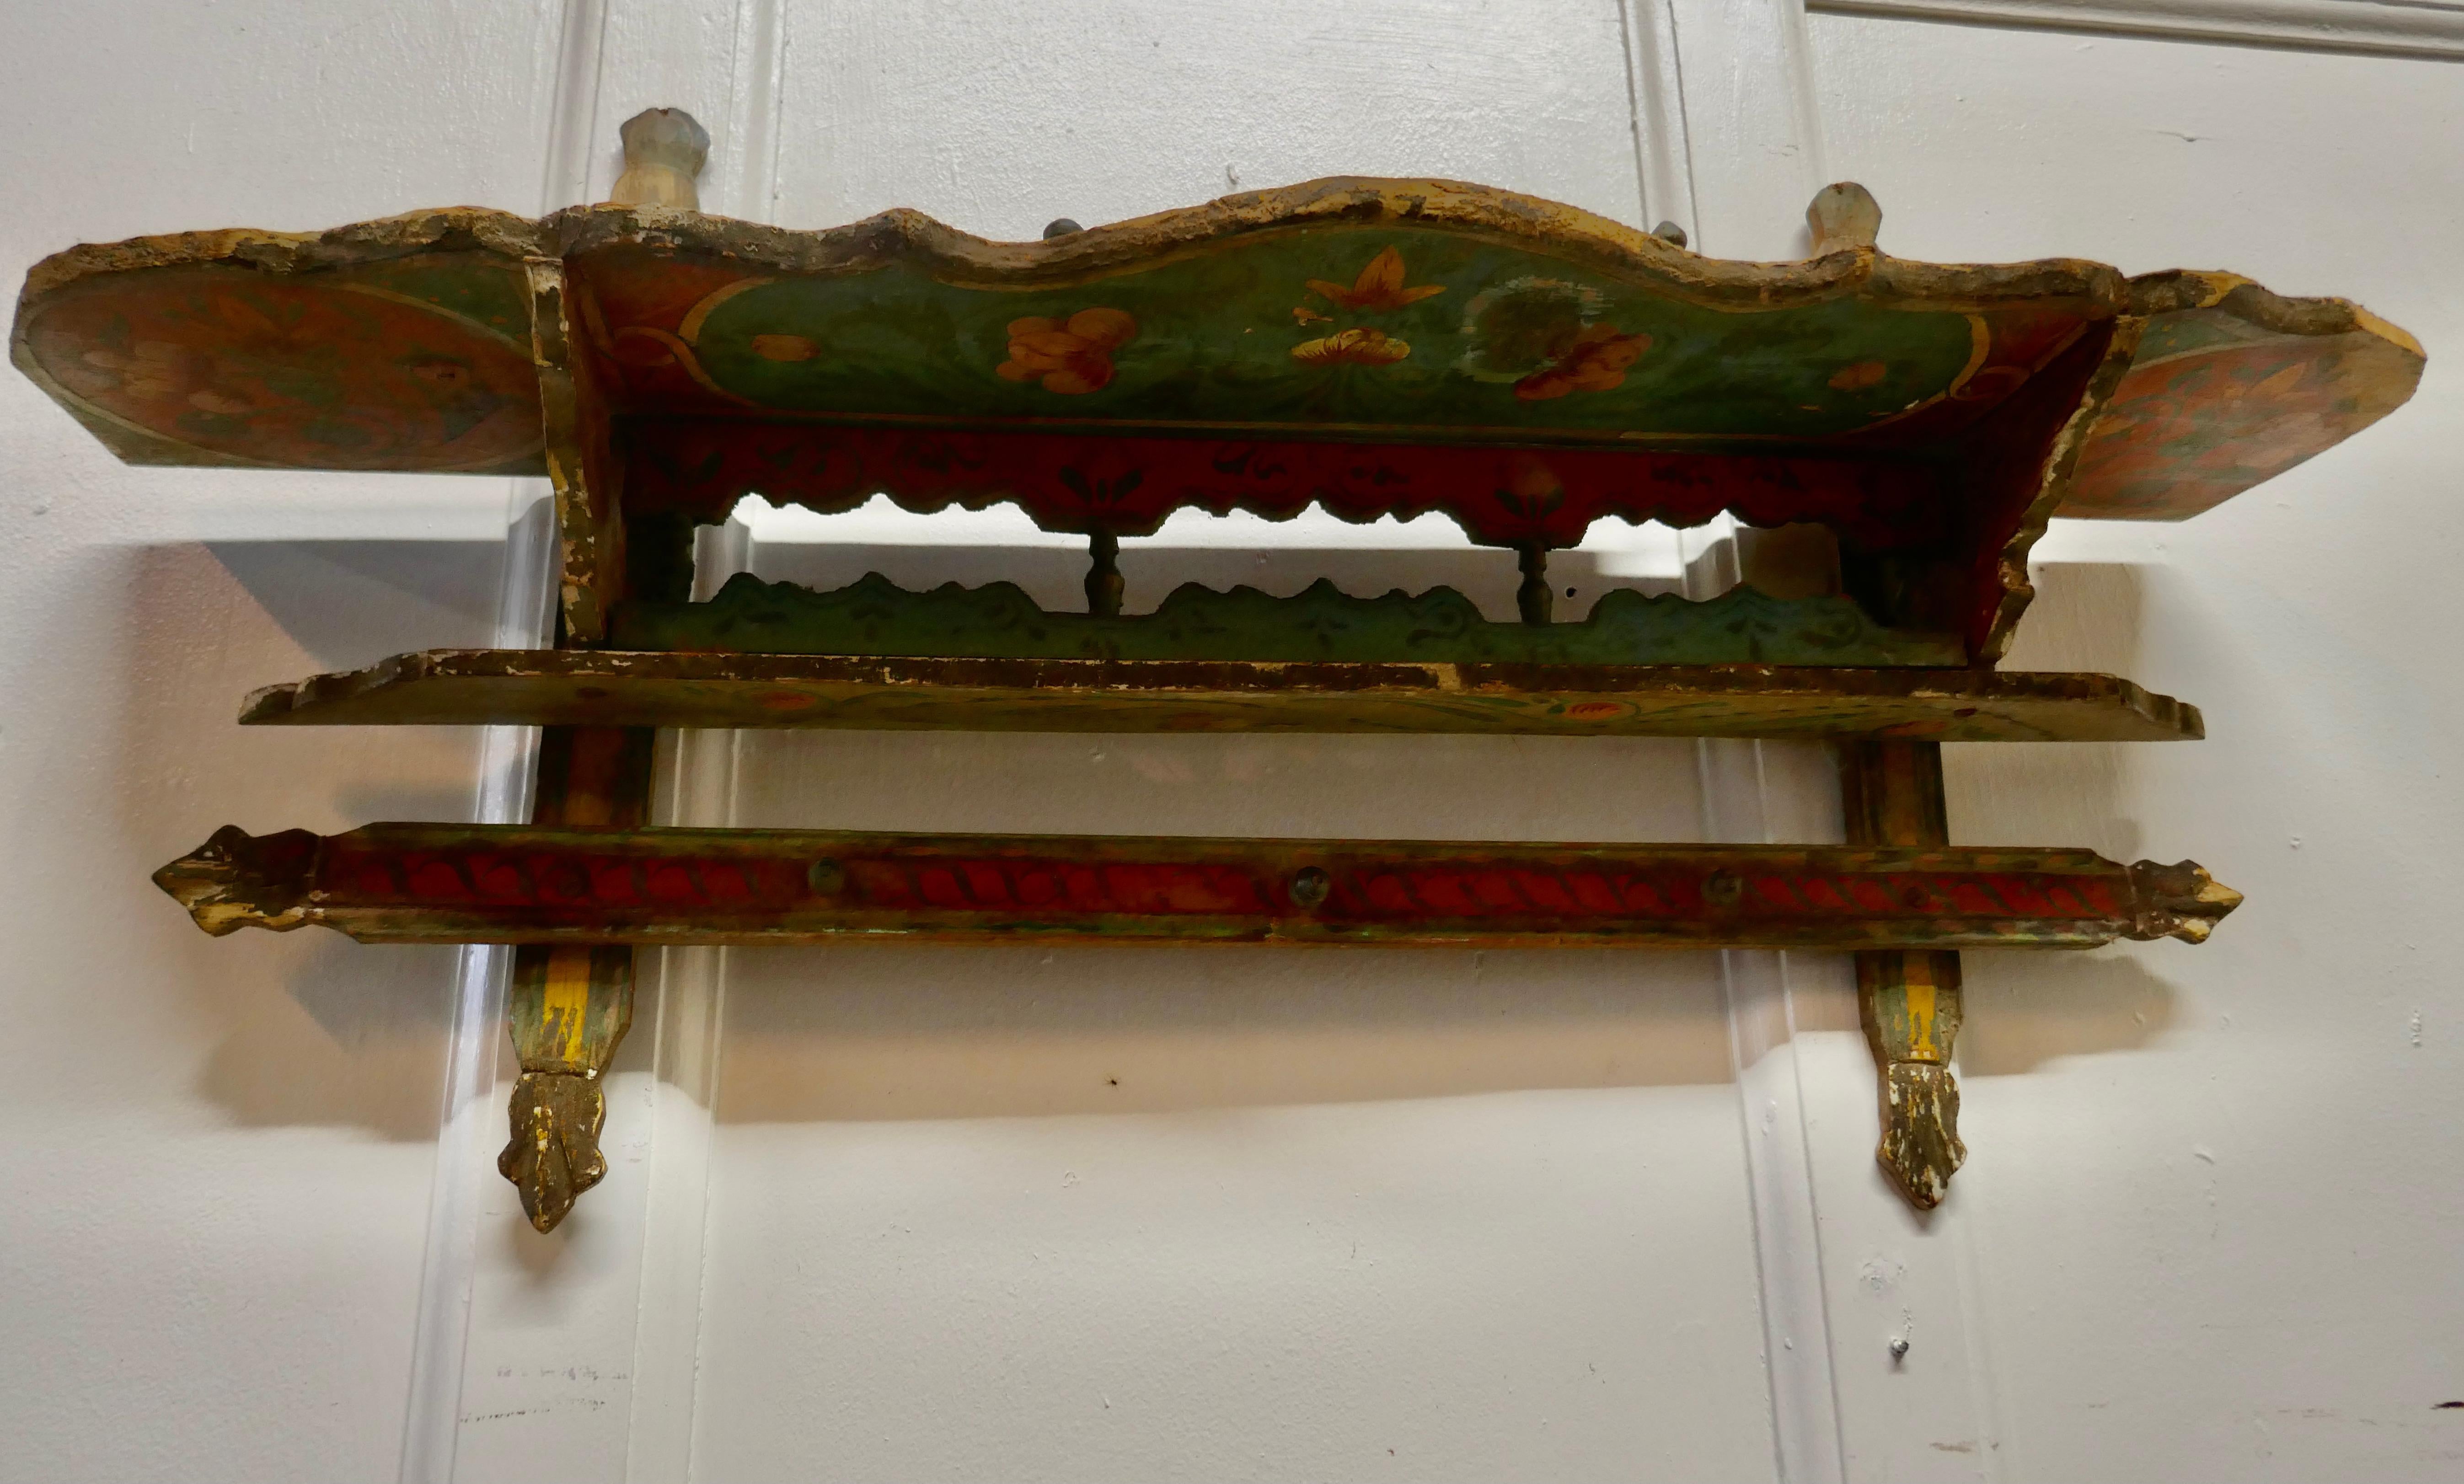 Rustic Folk Art wall shelf 

This charming little shelf comes from the South of France and it is painted in the Mediterranean Folk Style with many bright colours, sadly the paint is now worn and shabby, but still a very desirable piece

The